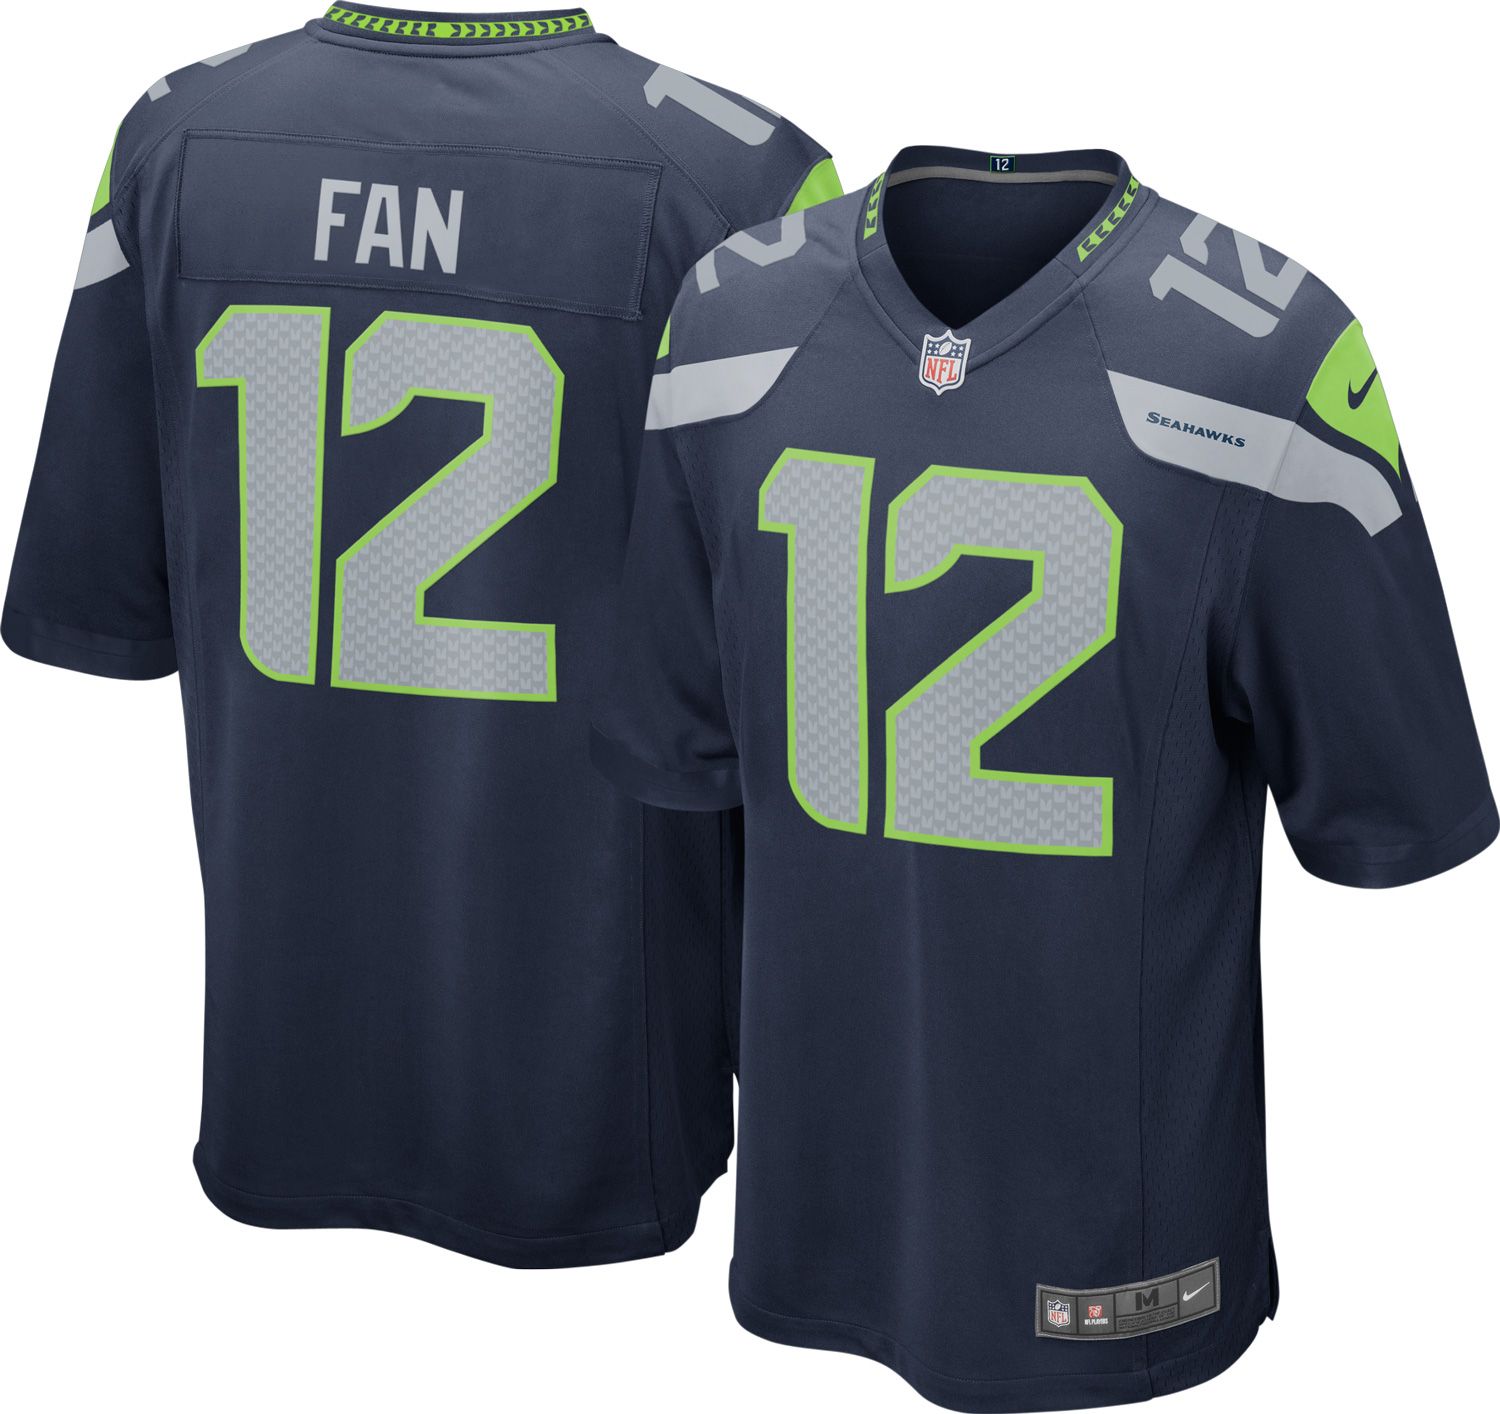 official seahawks jersey